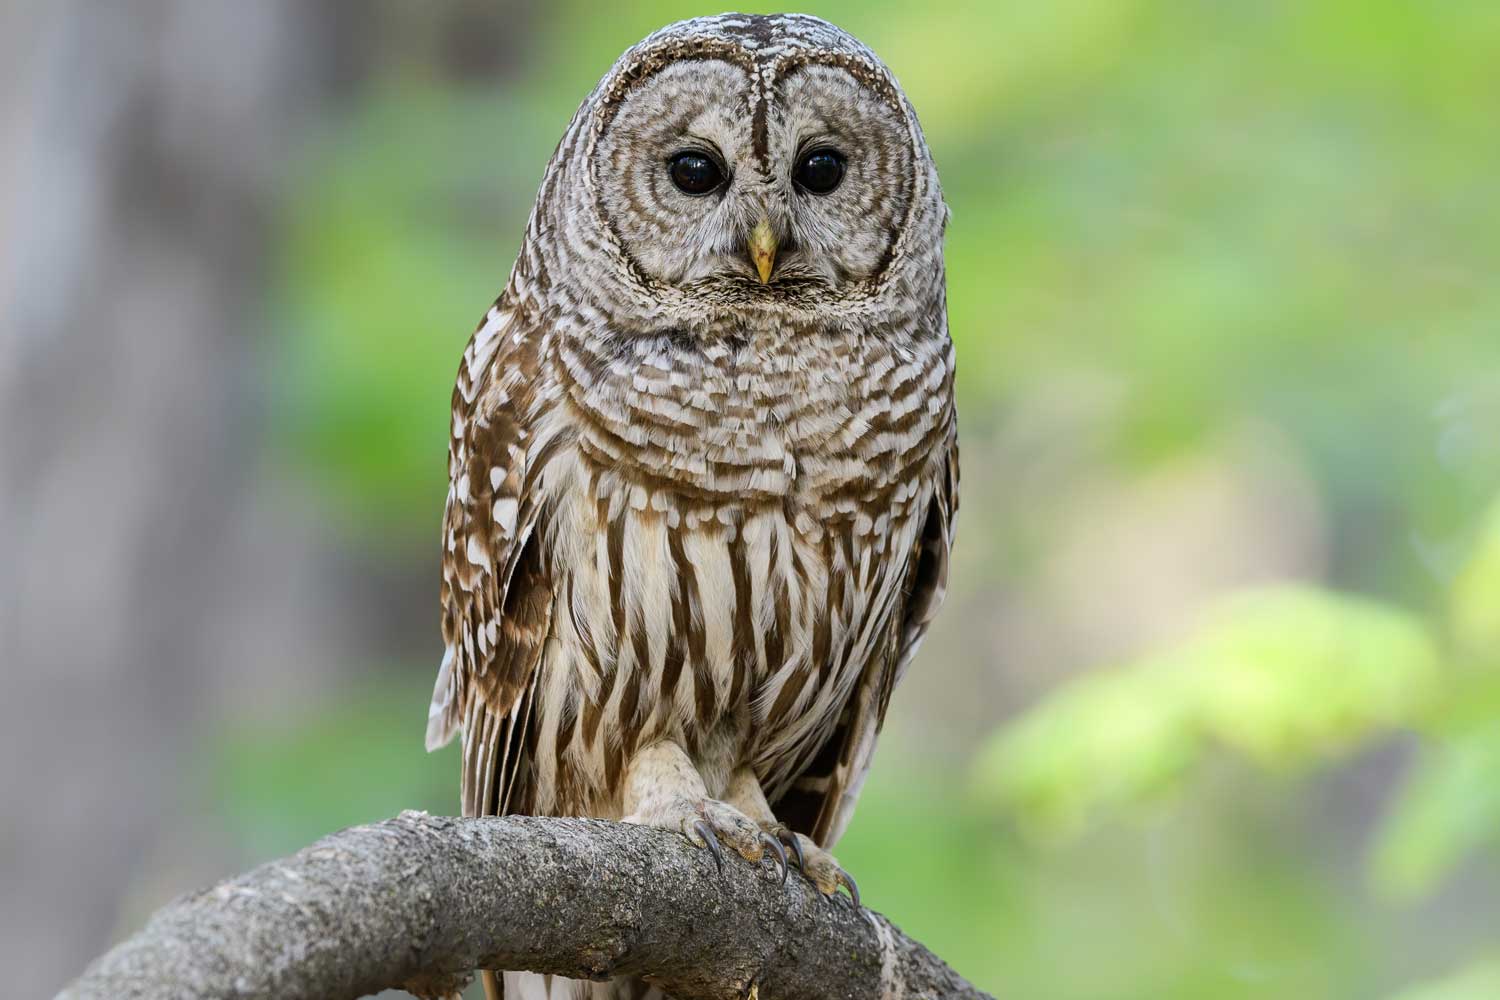 Barred owl perched on a branch.